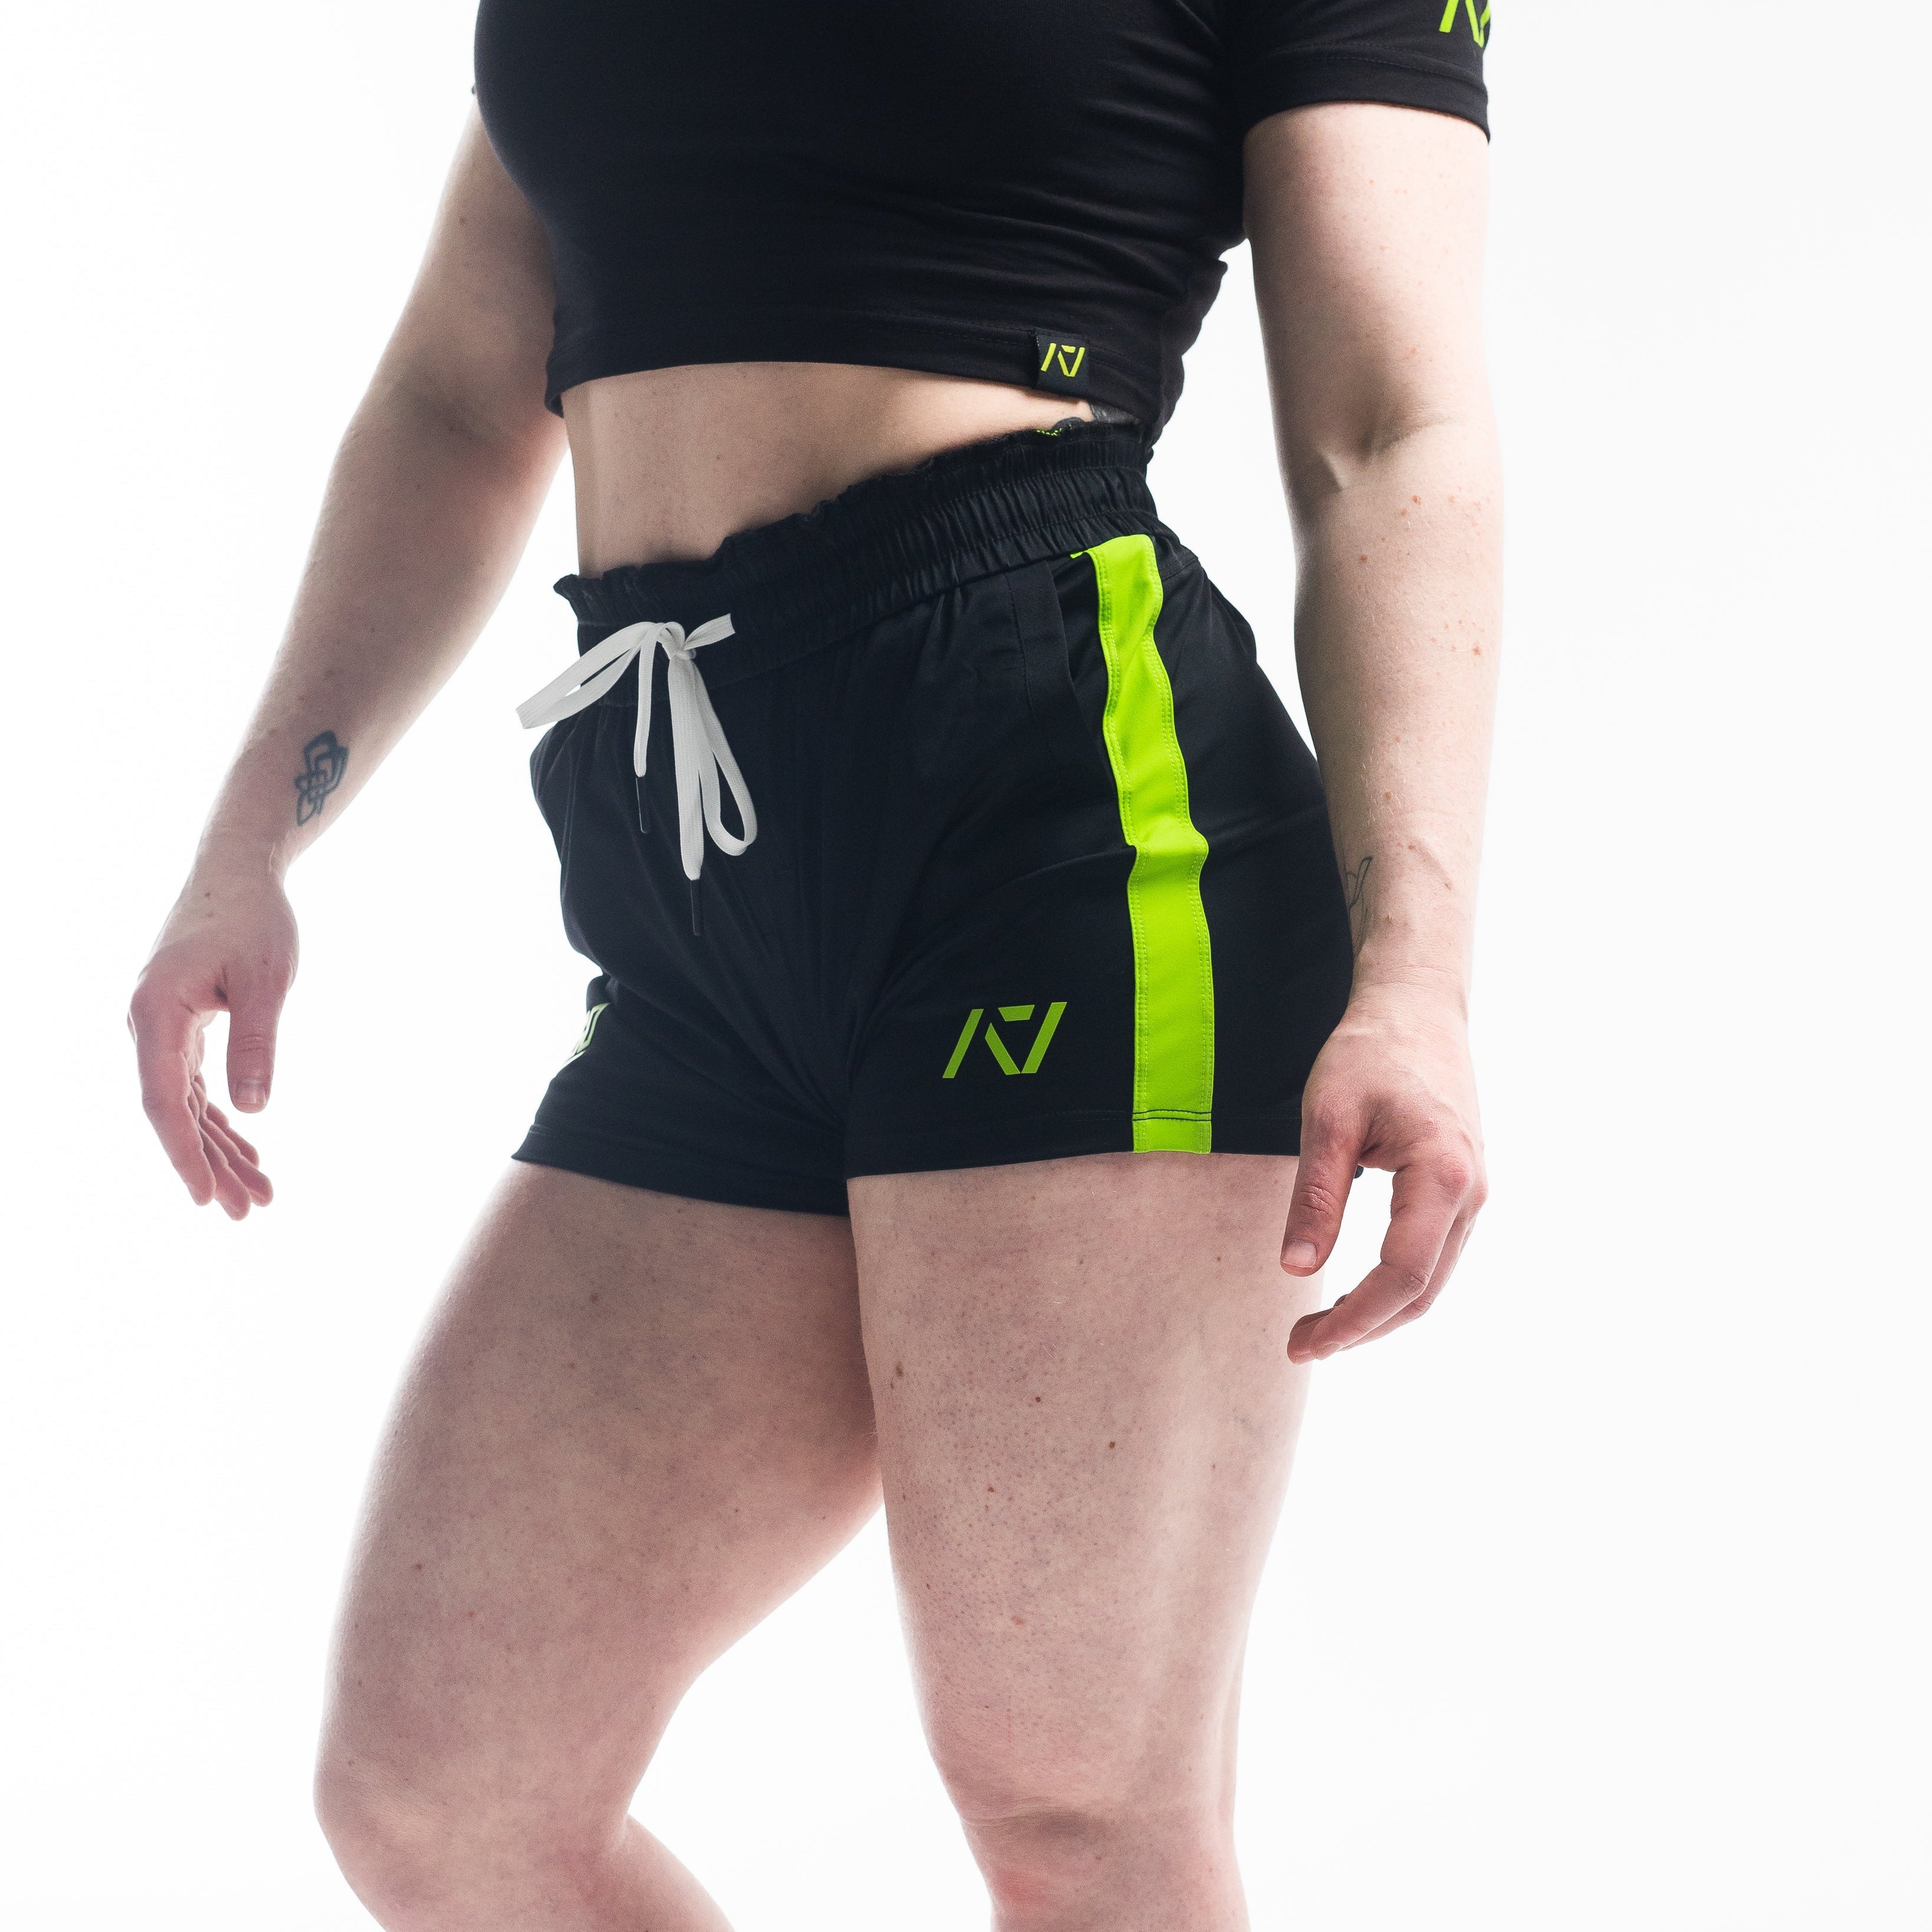 360GO was created to provide the flexibility for all movements in your training while offering comfort. These shorts offer 360 degrees of stretch in all angles and allow you to remain comfortable without limiting any movement in both training and life environments. Designed with a wide drawstring to easily adjust your waist without slipping. Purchase 360GO KWD shorts from A7 Europe. Genouillères powerlifting shipping to France, Spain, Ireland, Germany, Italy, Sweden and EU.